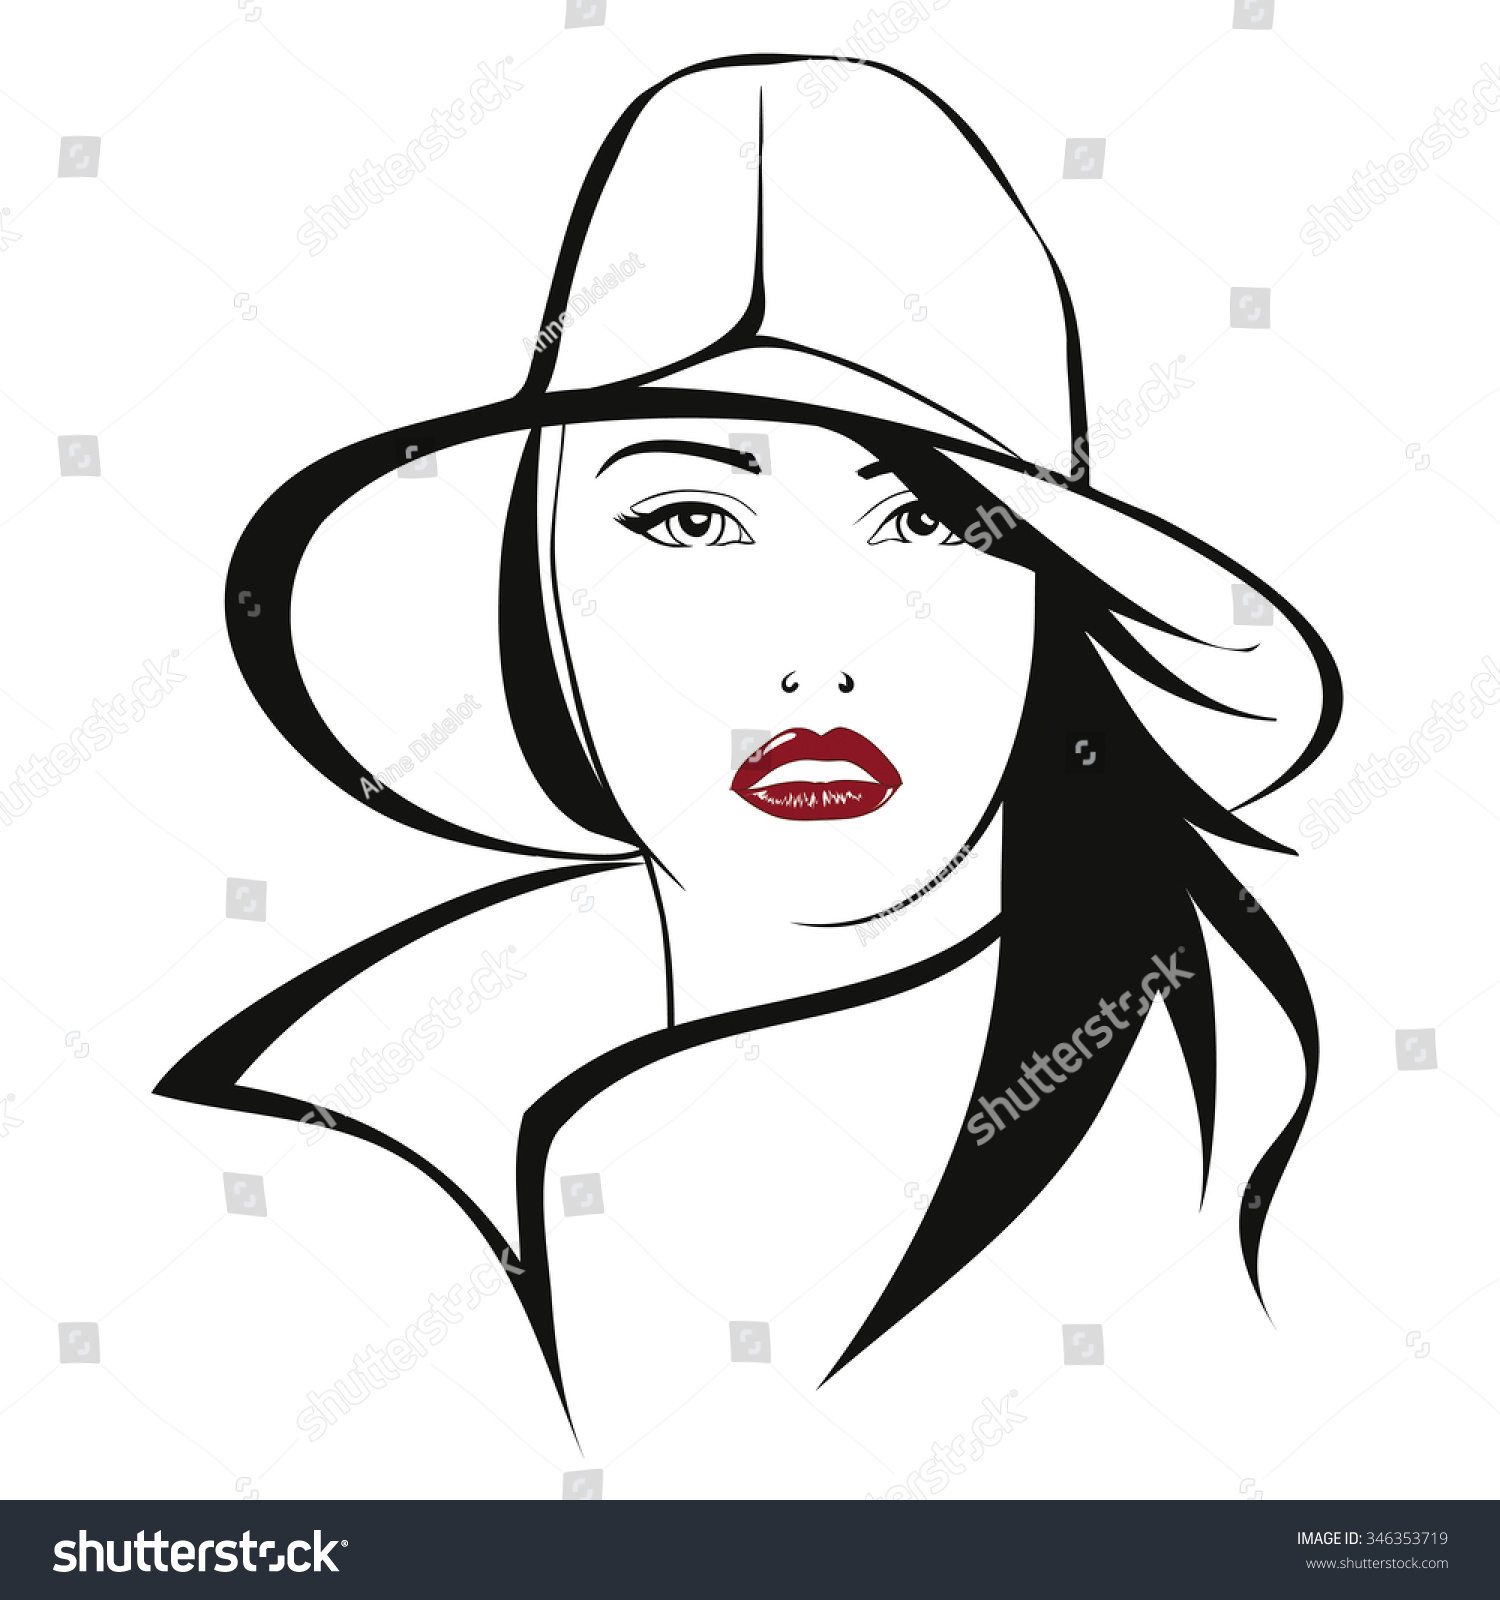 White hat in woman's face photo